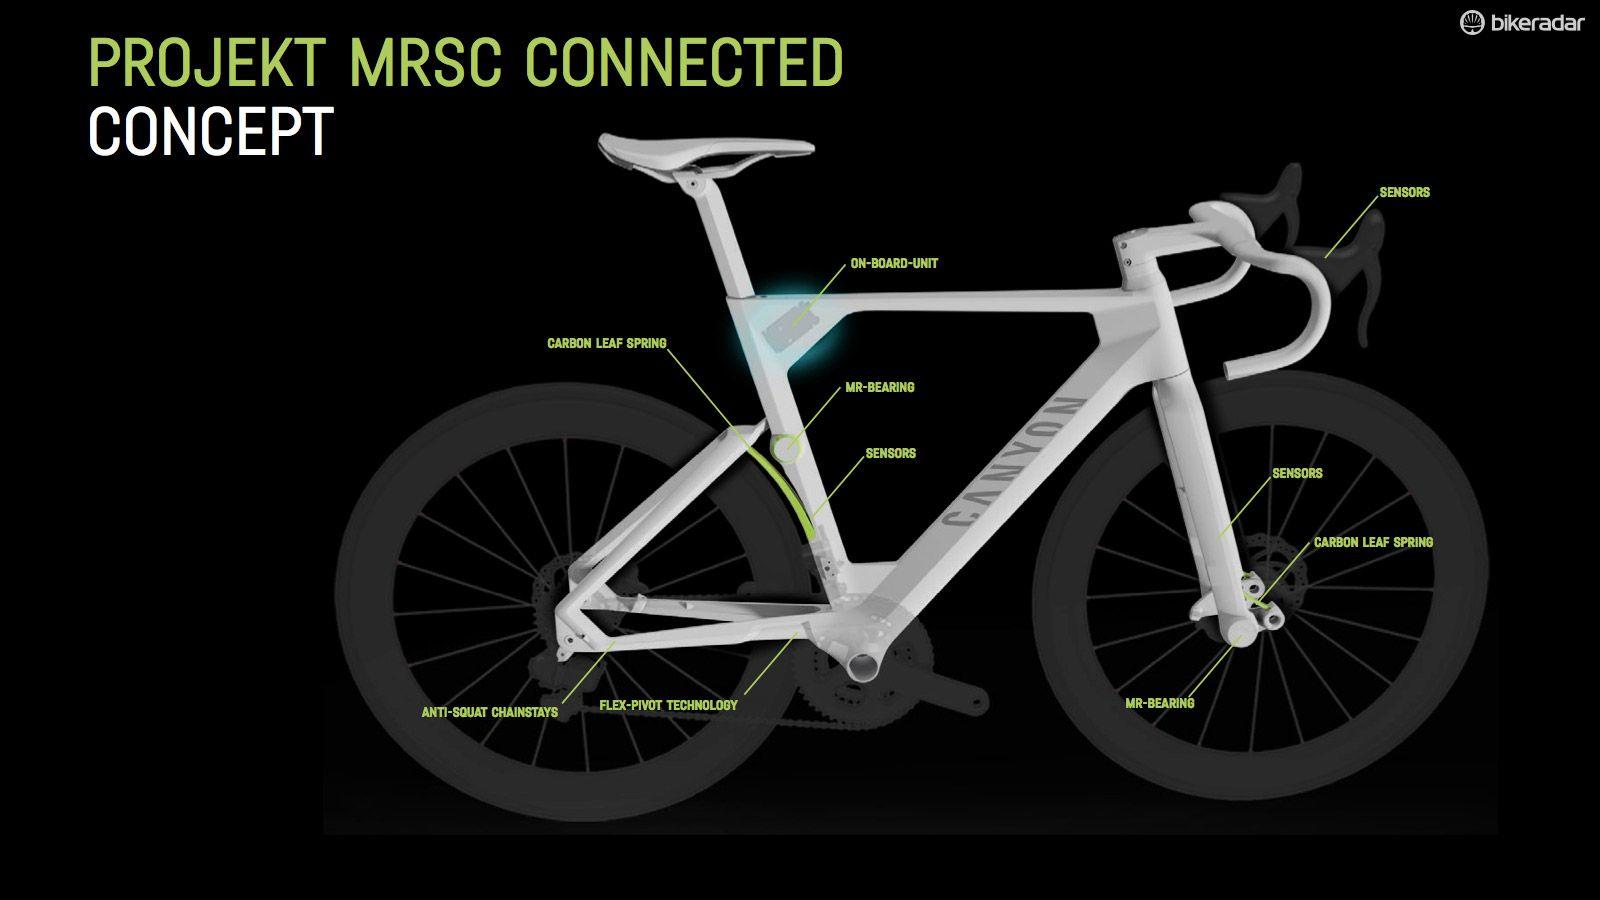 Canyon's incredible Projekt MRSC Connected concept road bike